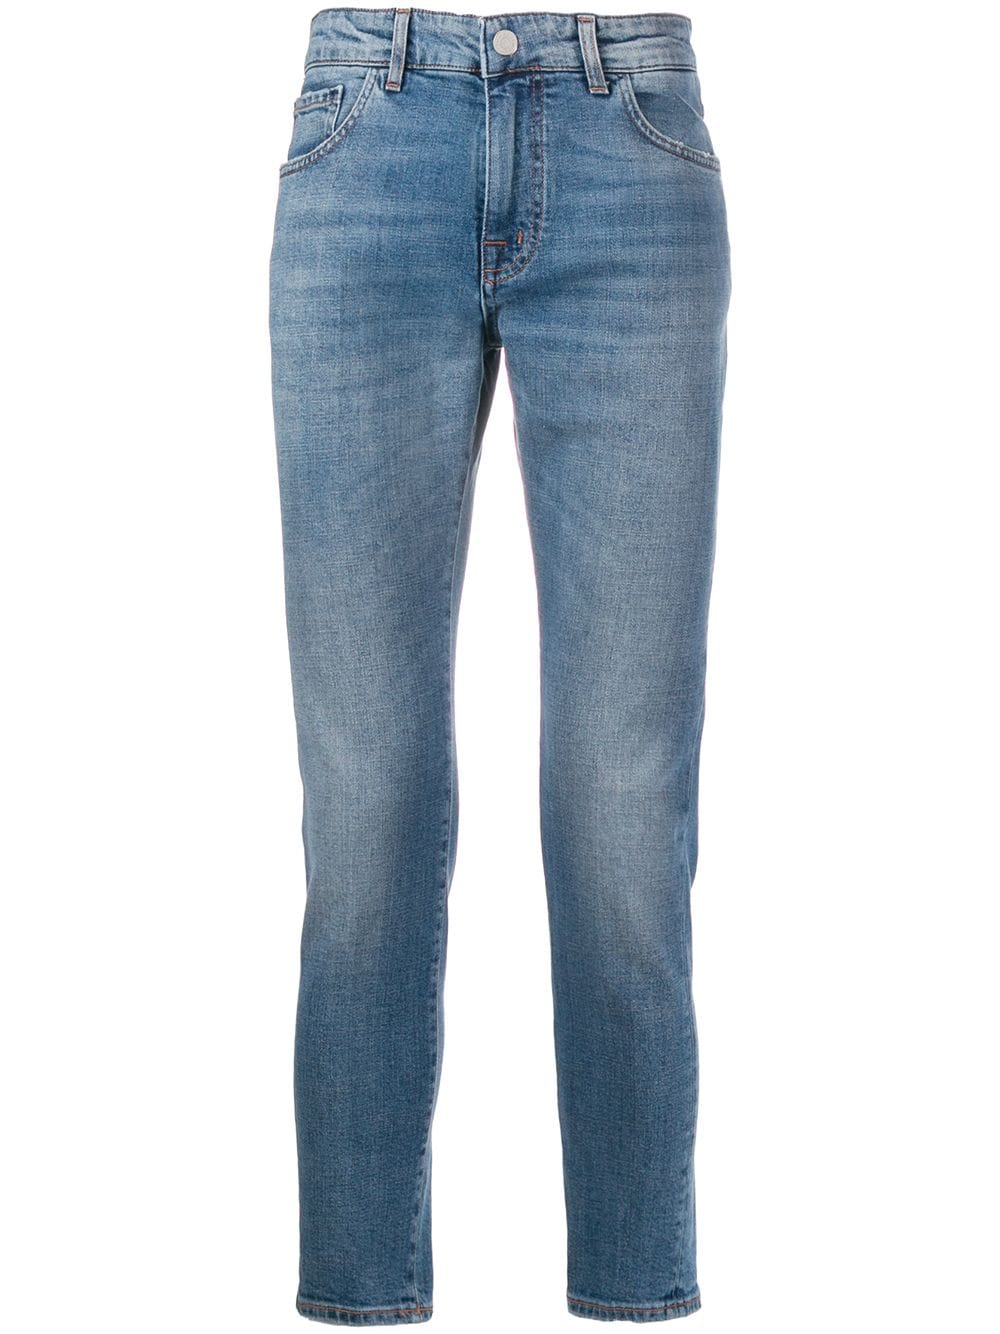 Entre Amis Cropped Denim Jeans In Blue